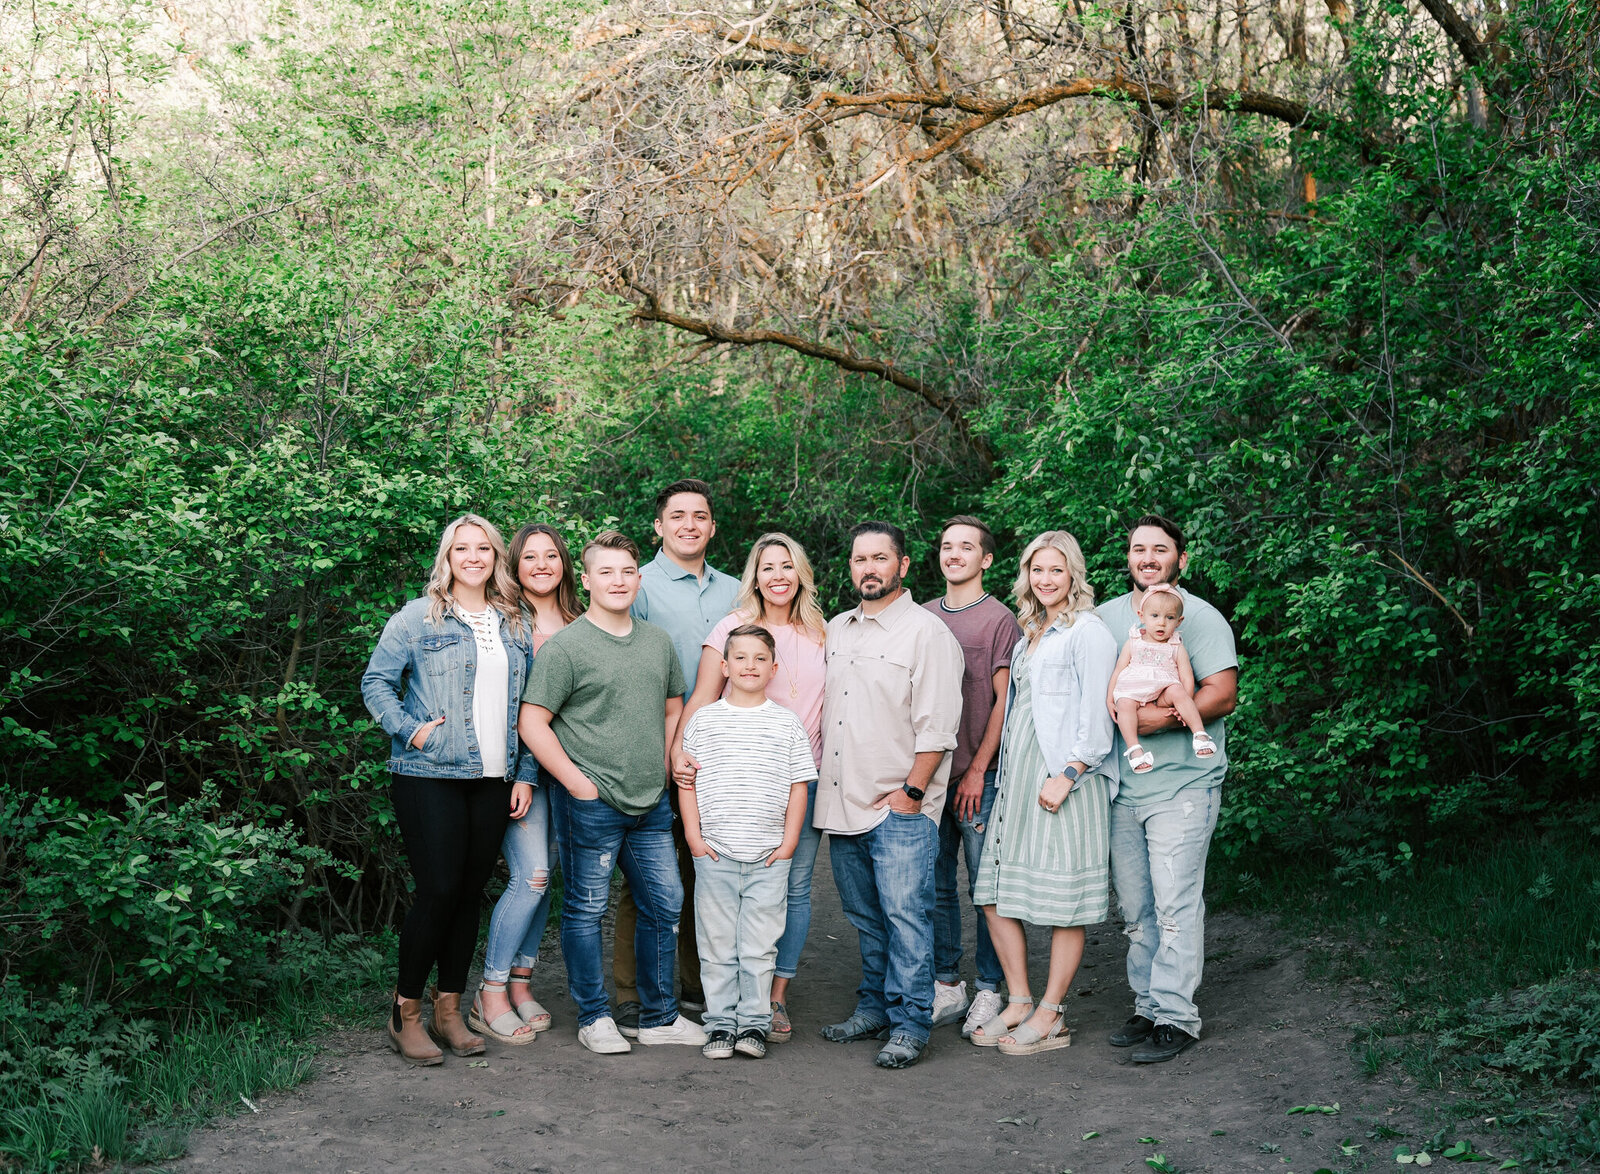 large family portrait ideas - Yahoo Image Search Results | Large family  pictures, Large family photos, Large family portraits